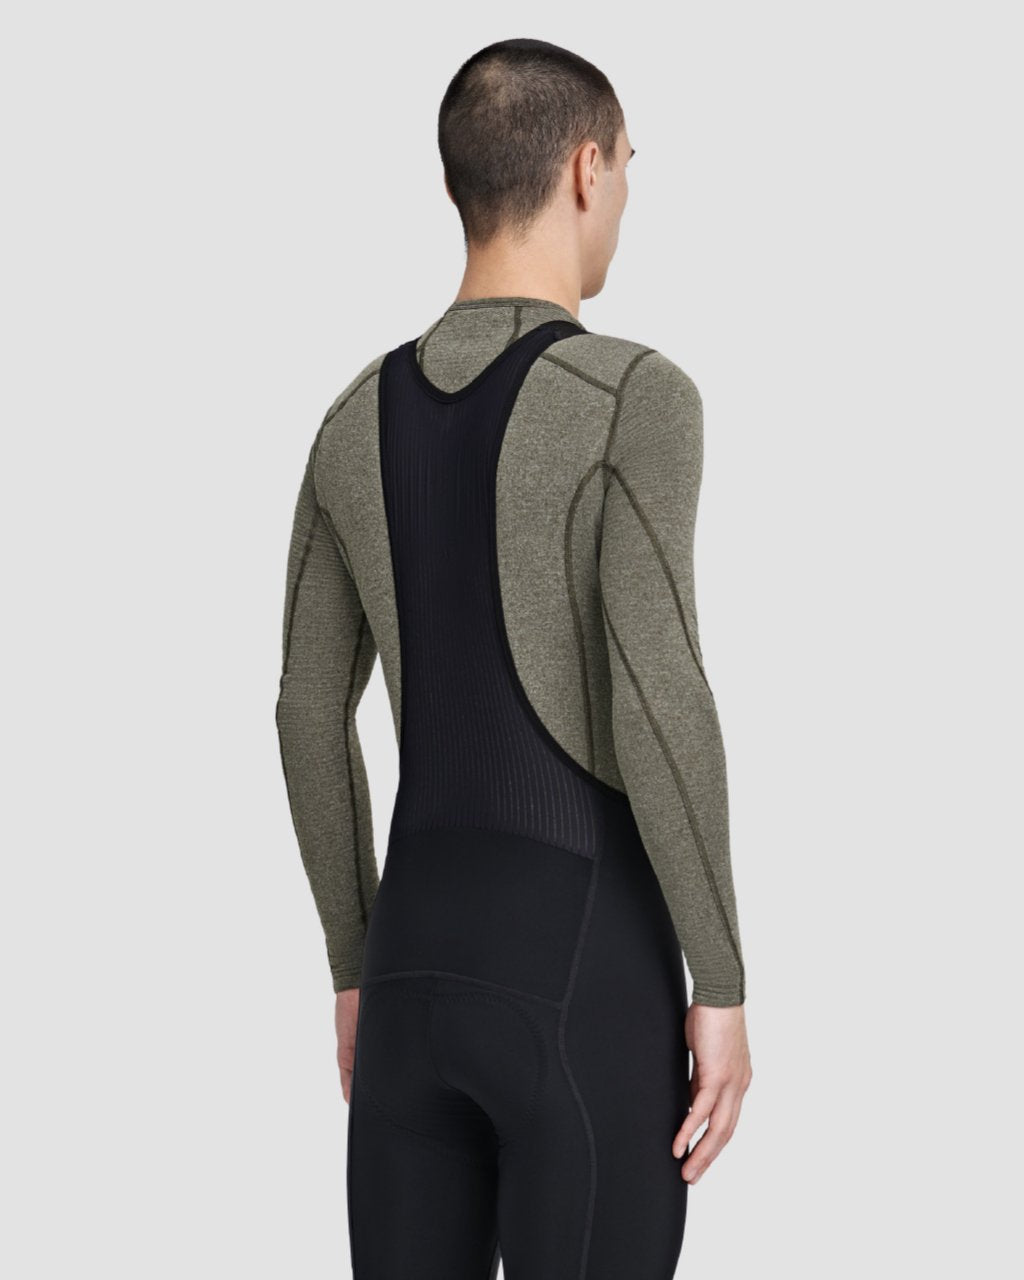 Deep Winter Base Layer - Olive